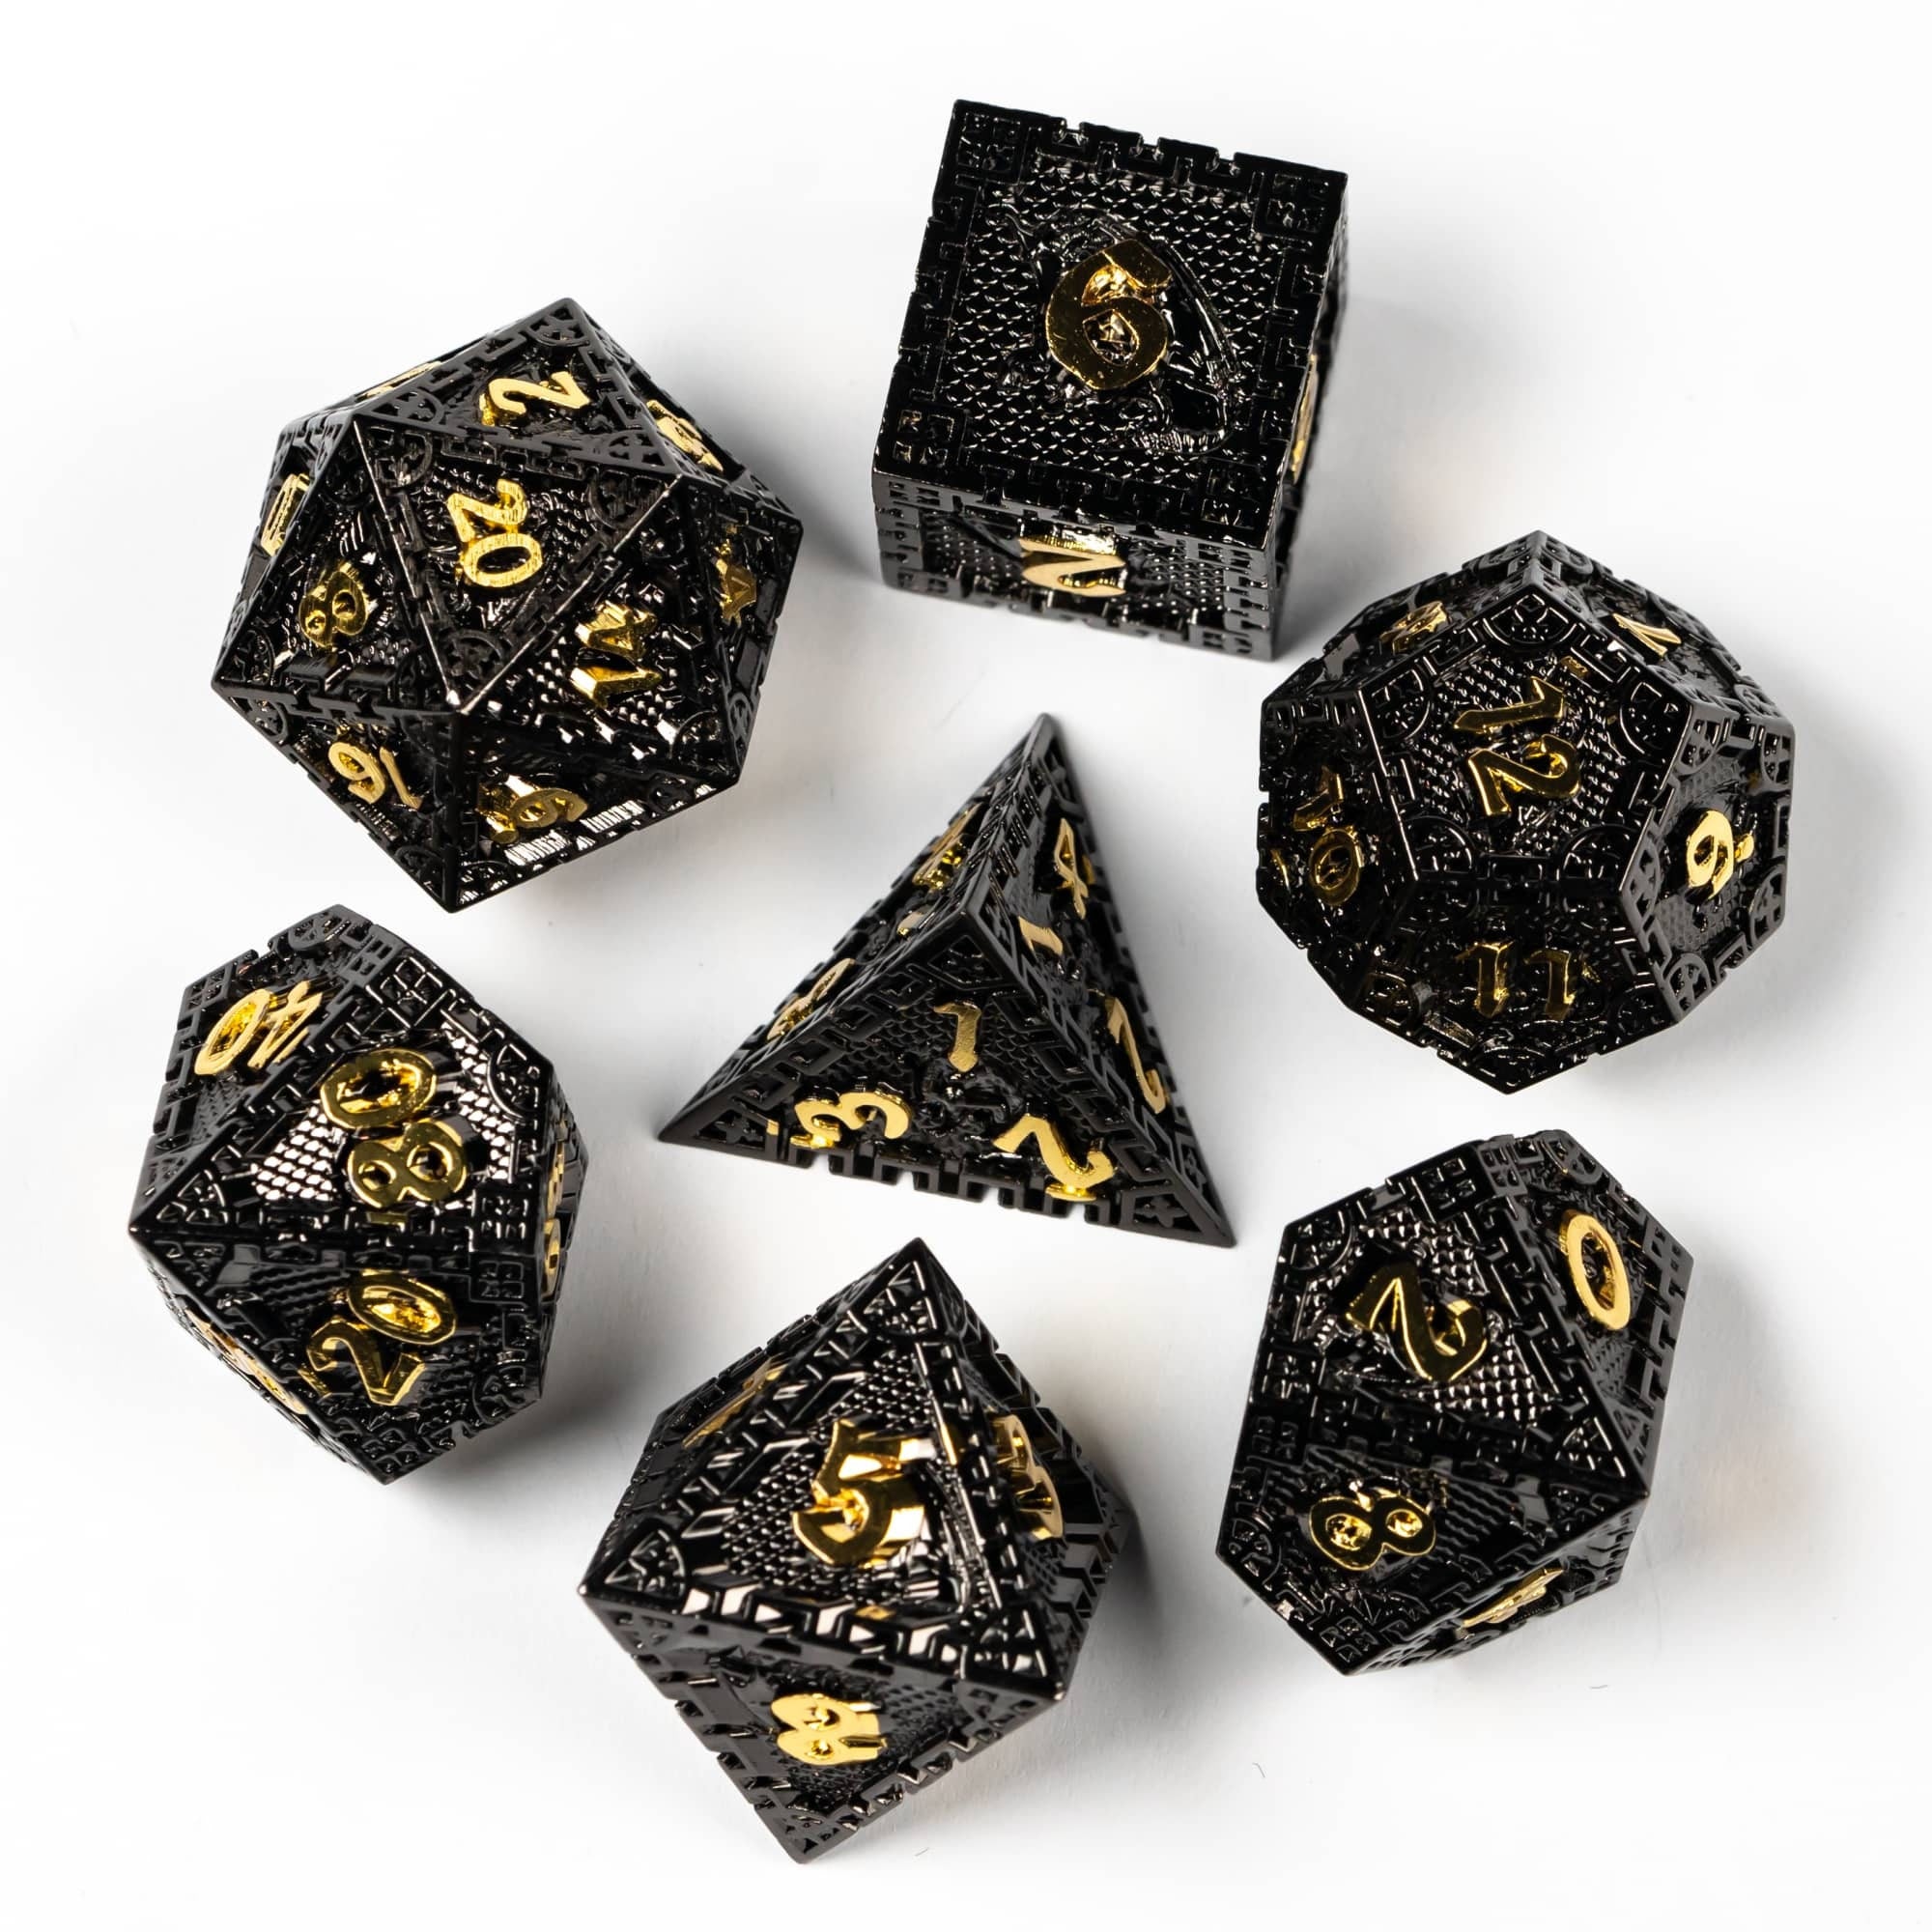 Black and Gold Dragon Guarded City Walls Metal DND/TTRPG Dice set - Dicemaniac